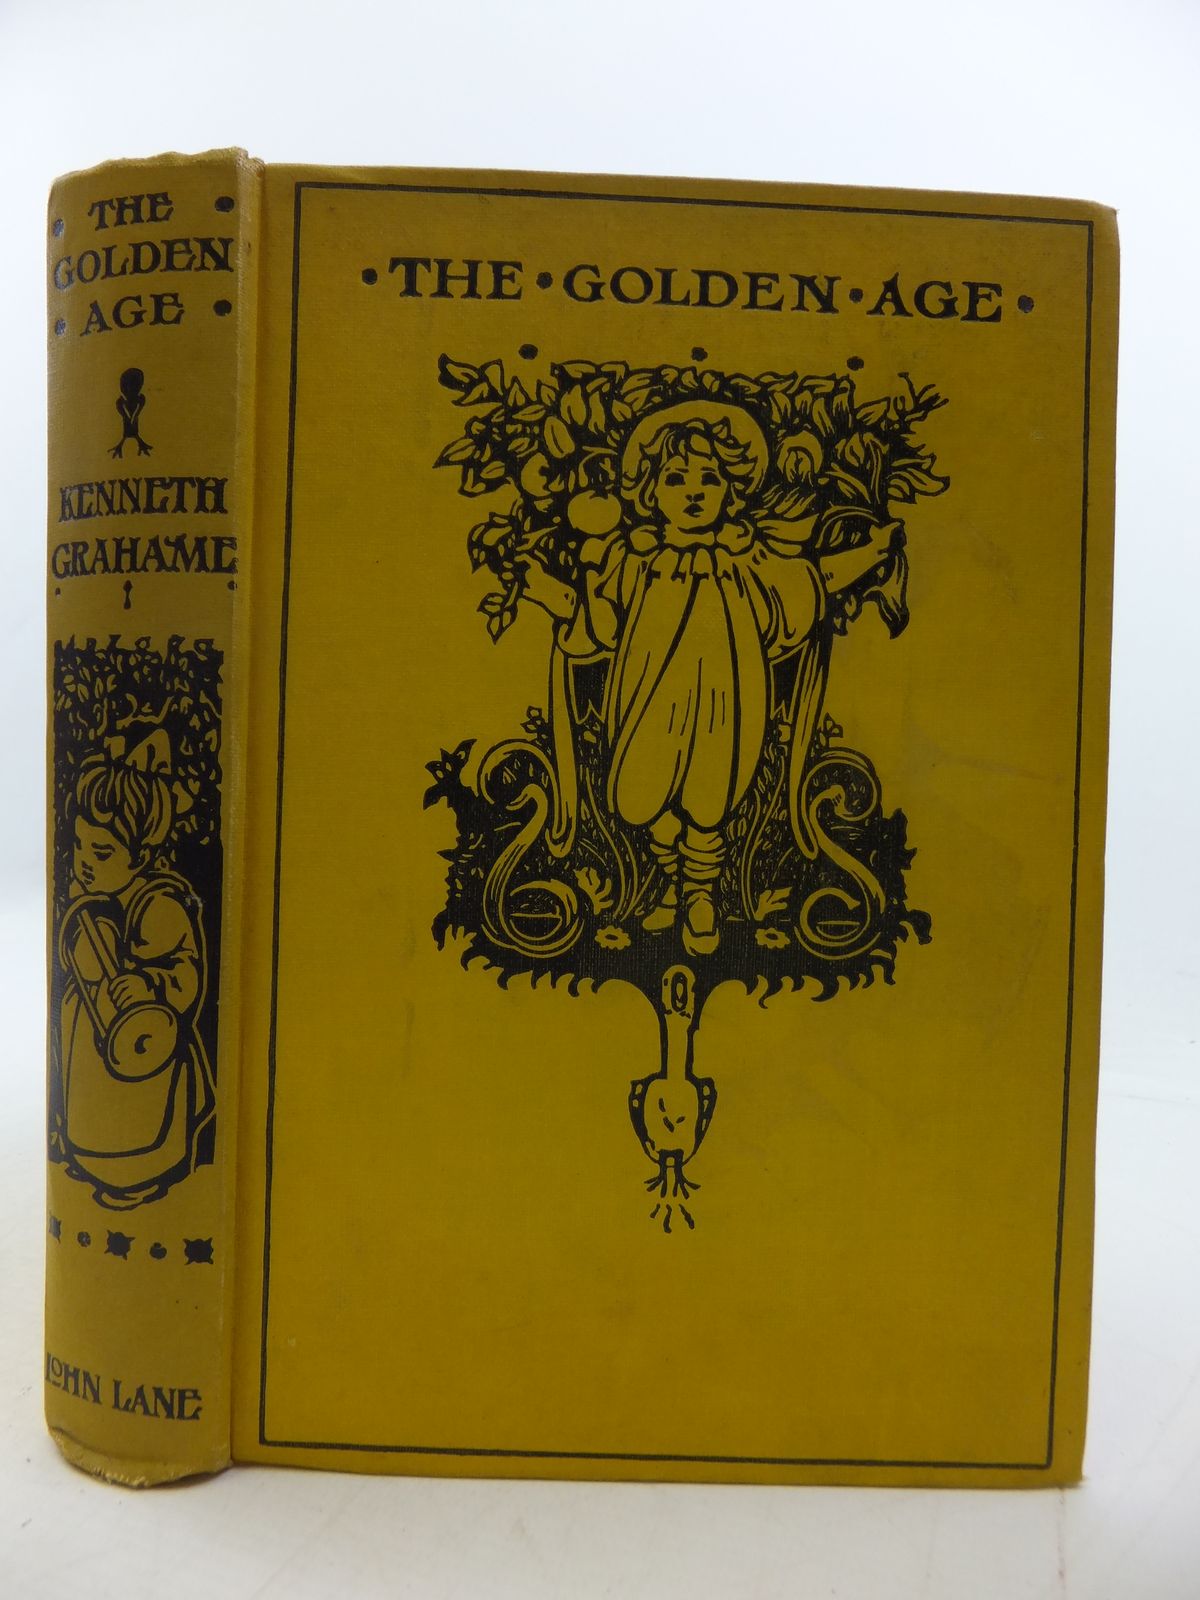 Photo of THE GOLDEN AGE written by Grahame, Kenneth published by John Lane The Bodley Head (STOCK CODE: 1808462)  for sale by Stella & Rose's Books